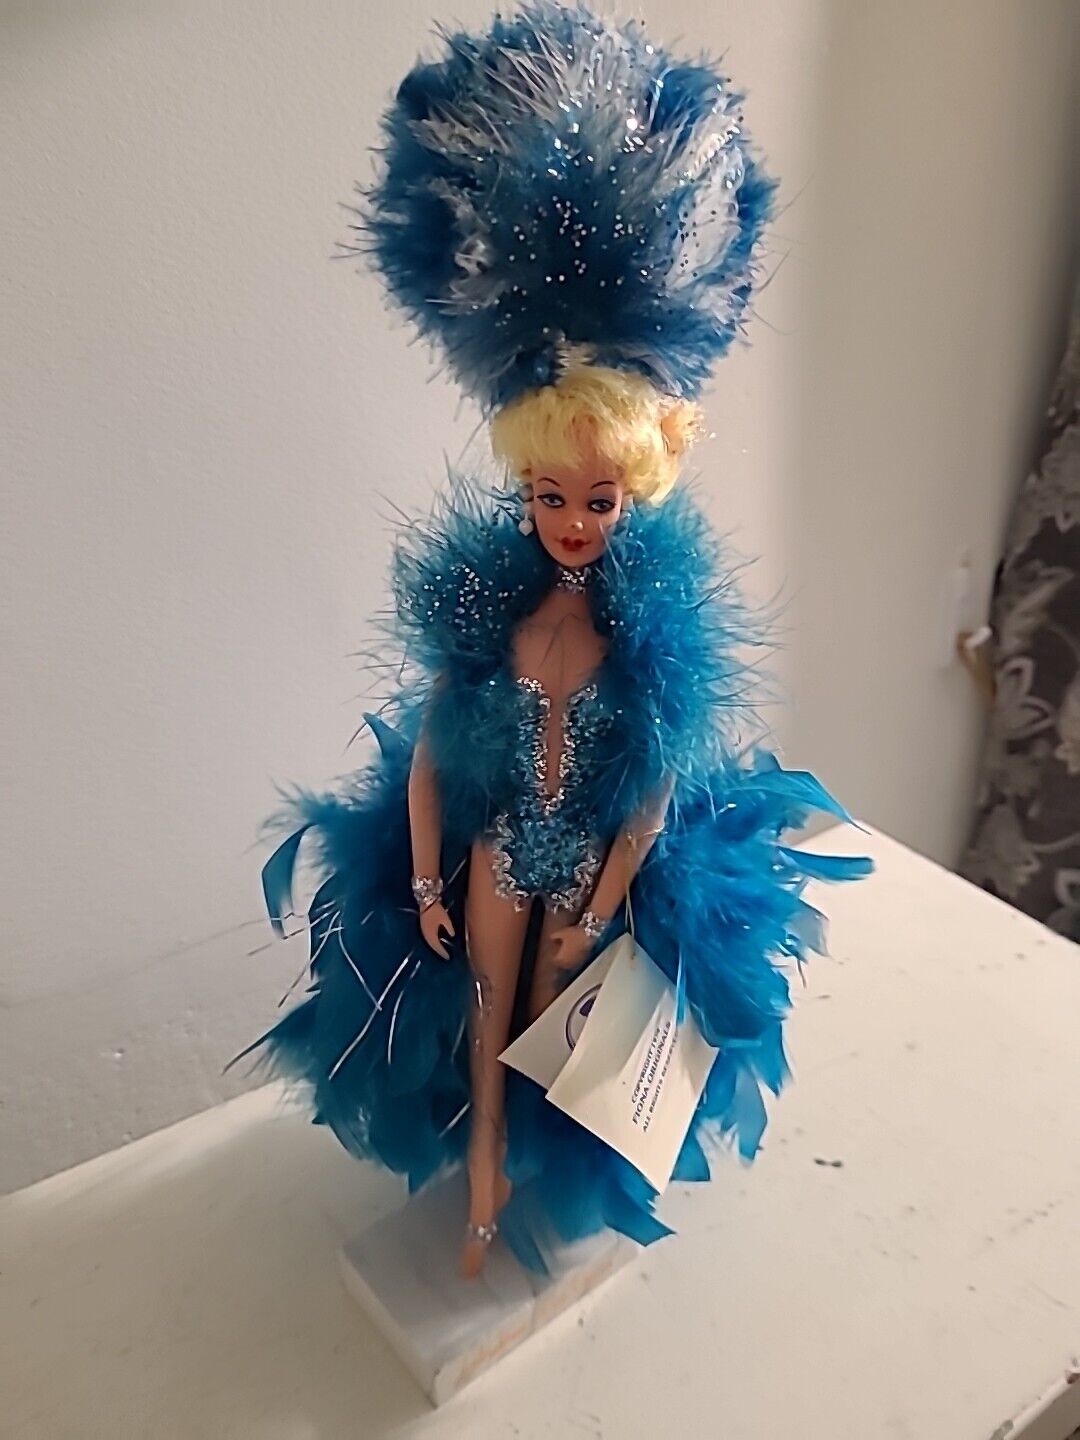 VINTAGE AUTHENTIC COLLECTABLE SHOWGIRL DOLL MADE IN LAS VEGAS 1979